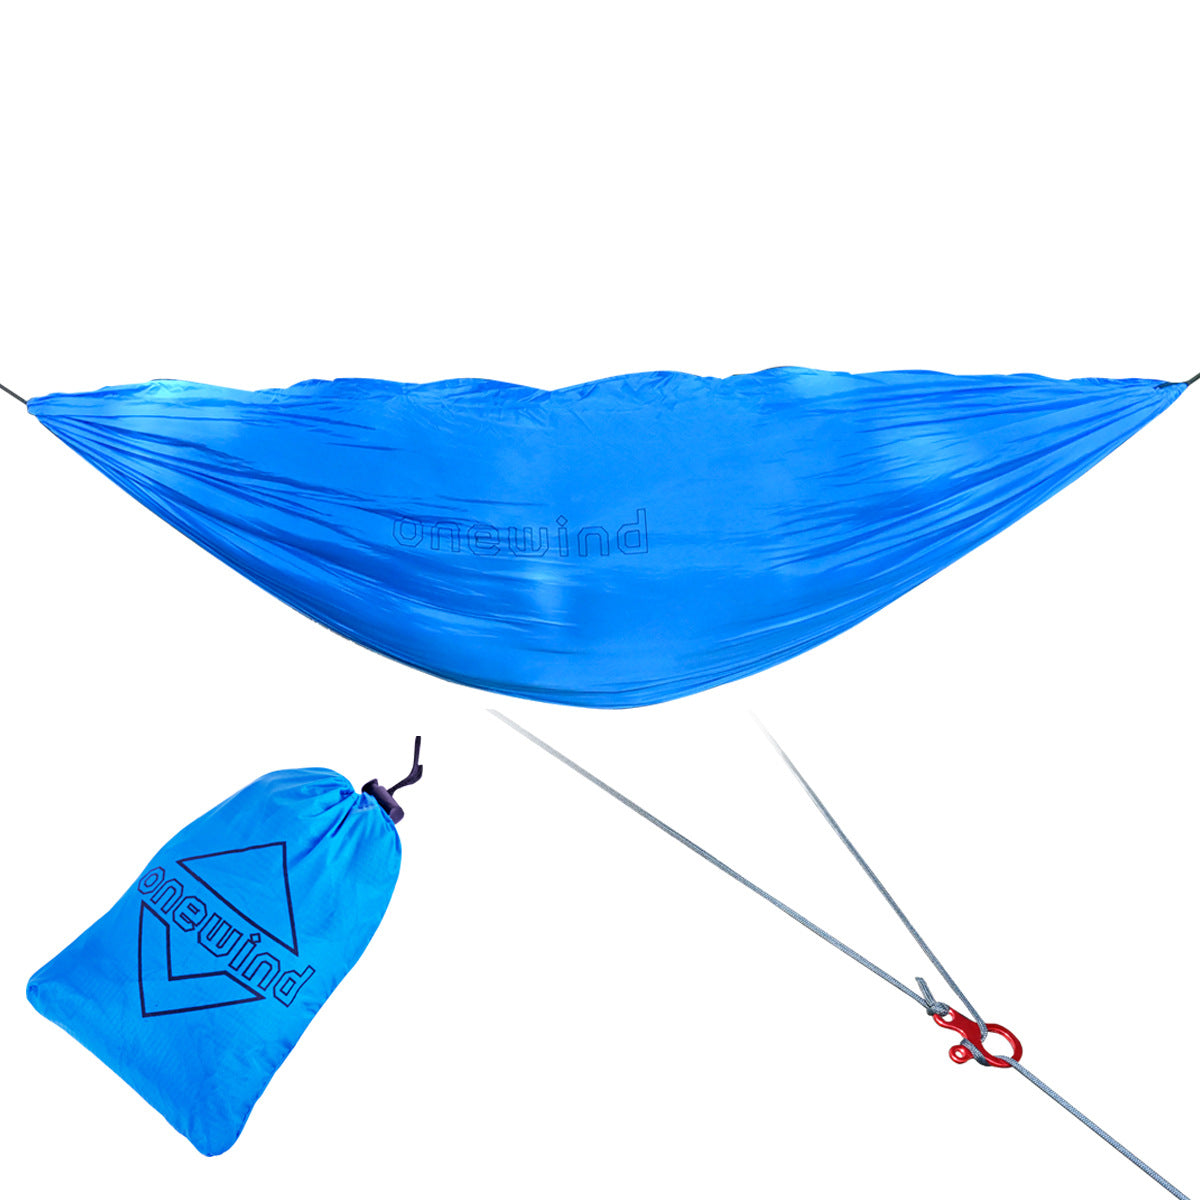 Hammock Chair Hanging Kit | Onewind Outdoors